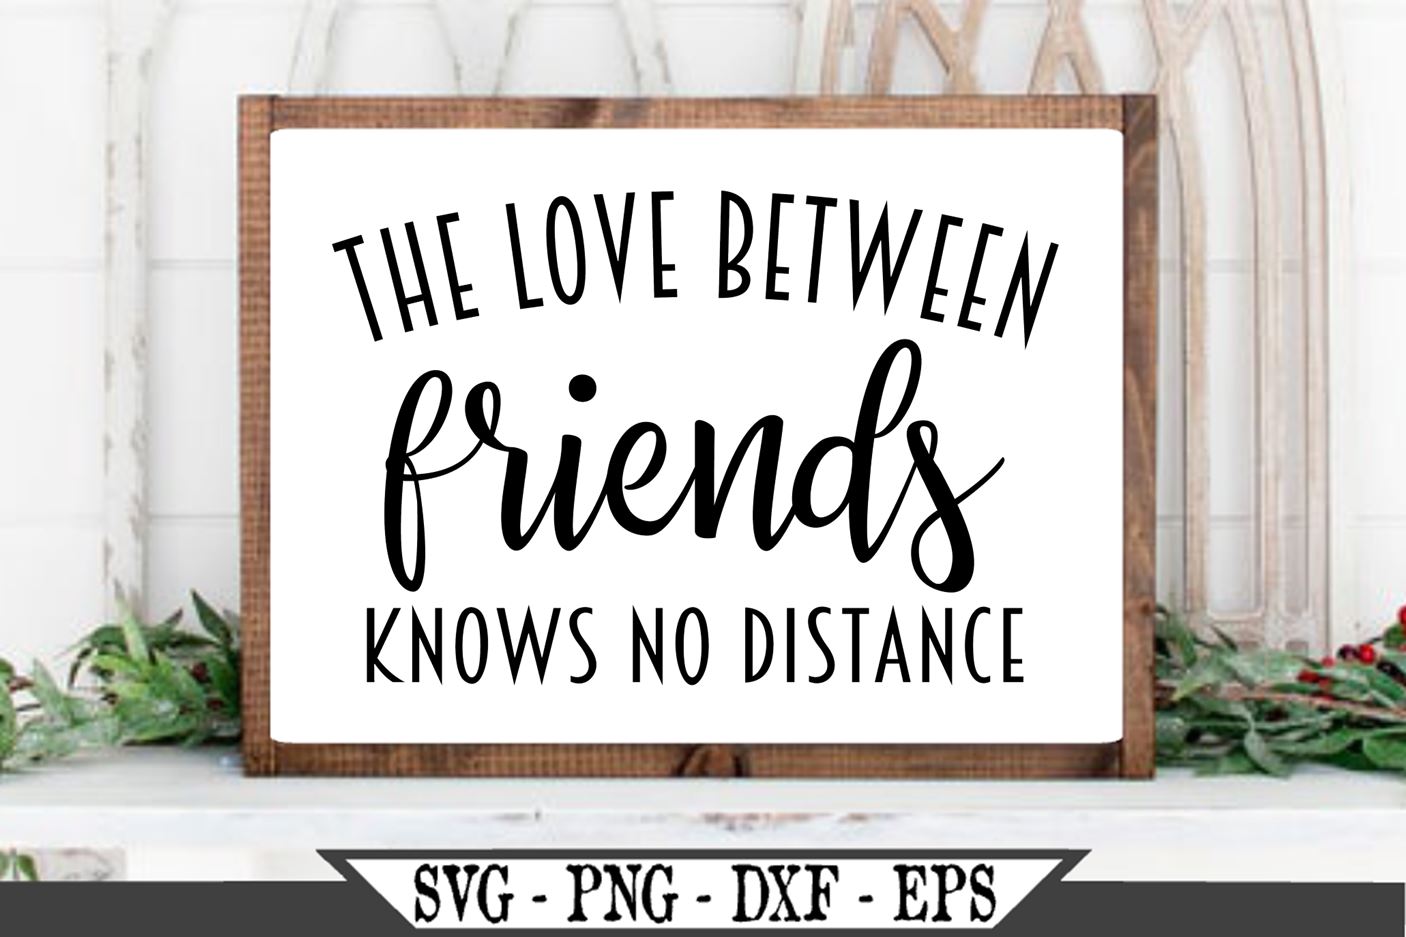 Download The Love Between Friends Knows No Distance Svg Vector Cut File So Fontsy